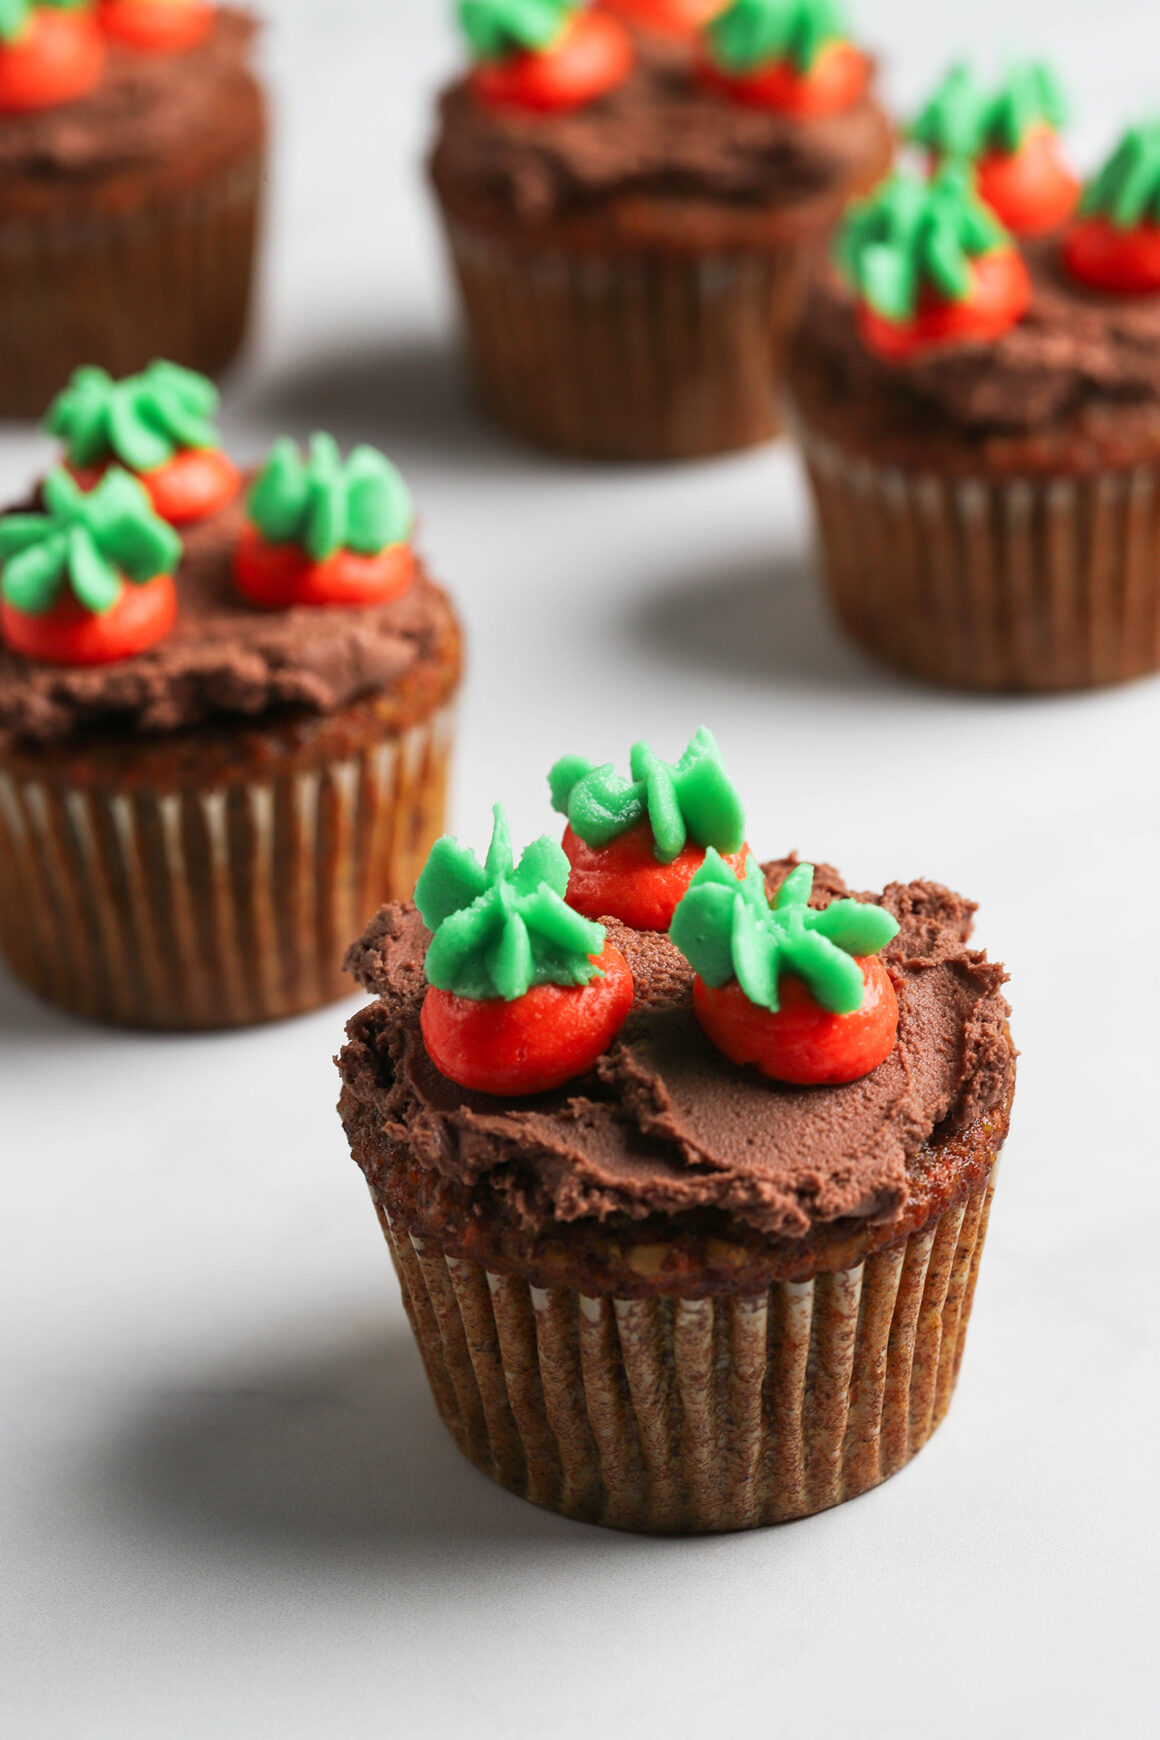 carrot cake cupcakes with carrot decorations